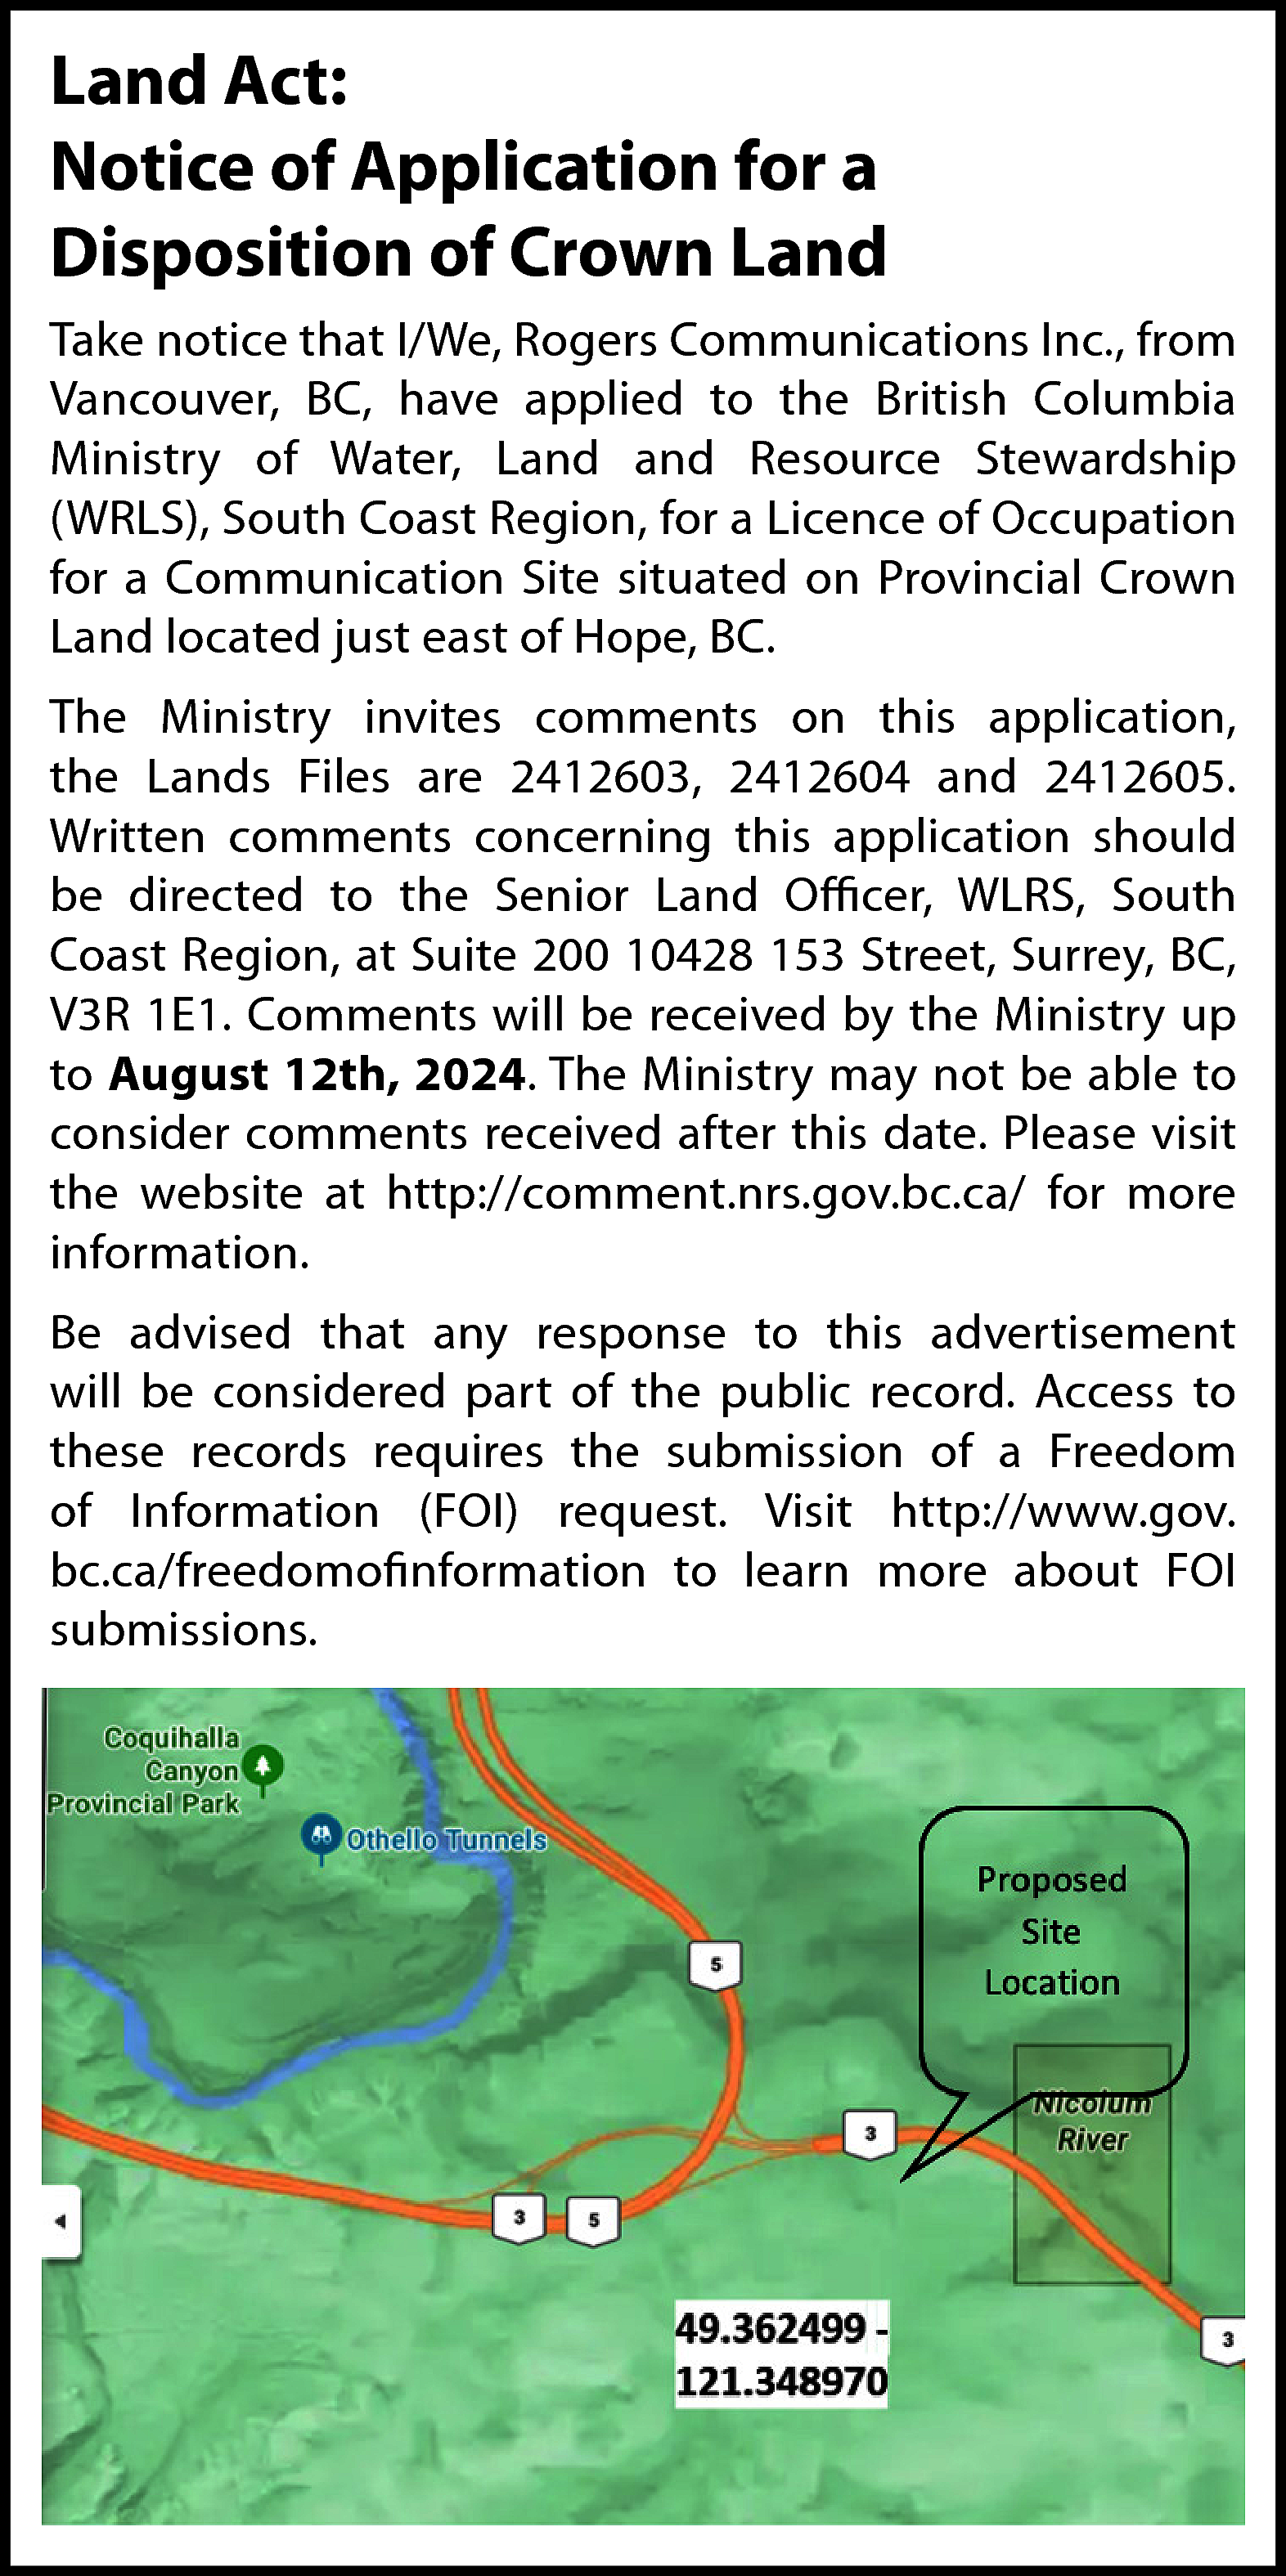 Land Act: <br>Notice of Application  Land Act:  Notice of Application for a  Disposition of Crown Land  Take notice that I/We, Rogers Communications Inc., from  Vancouver, BC, have applied to the British Columbia  Ministry of Water, Land and Resource Stewardship  (WRLS), South Coast Region, for a Licence of Occupation  for a Communication Site situated on Provincial Crown  Land located just east of Hope, BC.  The Ministry invites comments on this application,  the Lands Files are 2412603, 2412604 and 2412605.  Written comments concerning this application should  be directed to the Senior Land Officer, WLRS, South  Coast Region, at Suite 200 10428 153 Street, Surrey, BC,  V3R 1E1. Comments will be received by the Ministry up  to August 12th, 2024. The Ministry may not be able to  consider comments received after this date. Please visit  the website at http://comment.nrs.gov.bc.ca/ for more  information.  Be advised that any response to this advertisement  will be considered part of the public record. Access to  these records requires the submission of a Freedom  of Information (FOI) request. Visit http://www.gov.  bc.ca/freedomofinformation to learn more about FOI  submissions.    